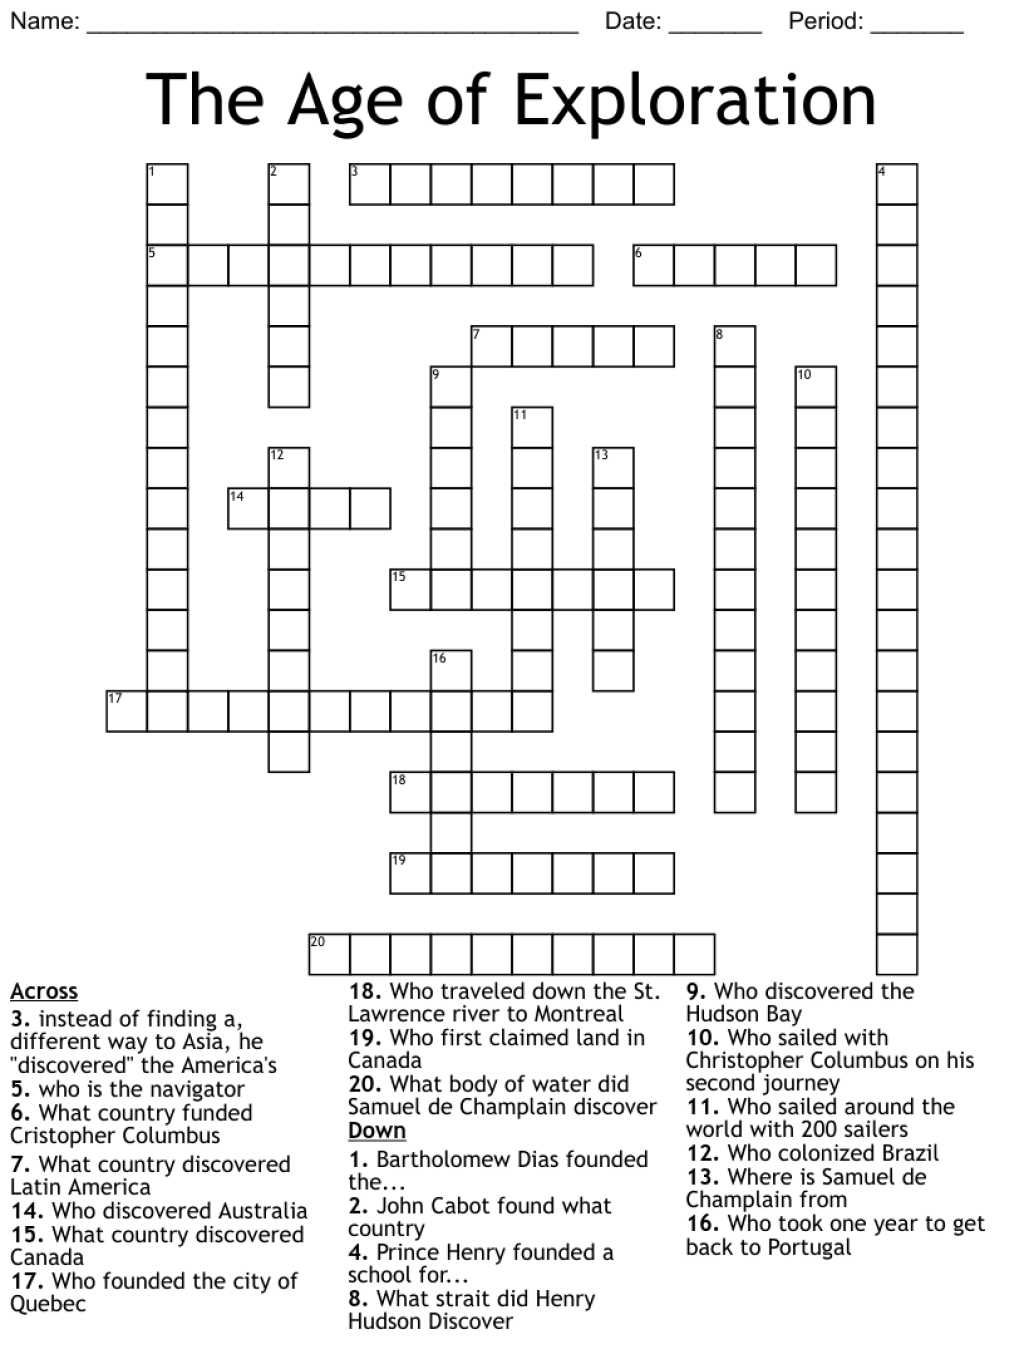 journey of exploration crossword - The Age of Exploration Crossword - WordMint